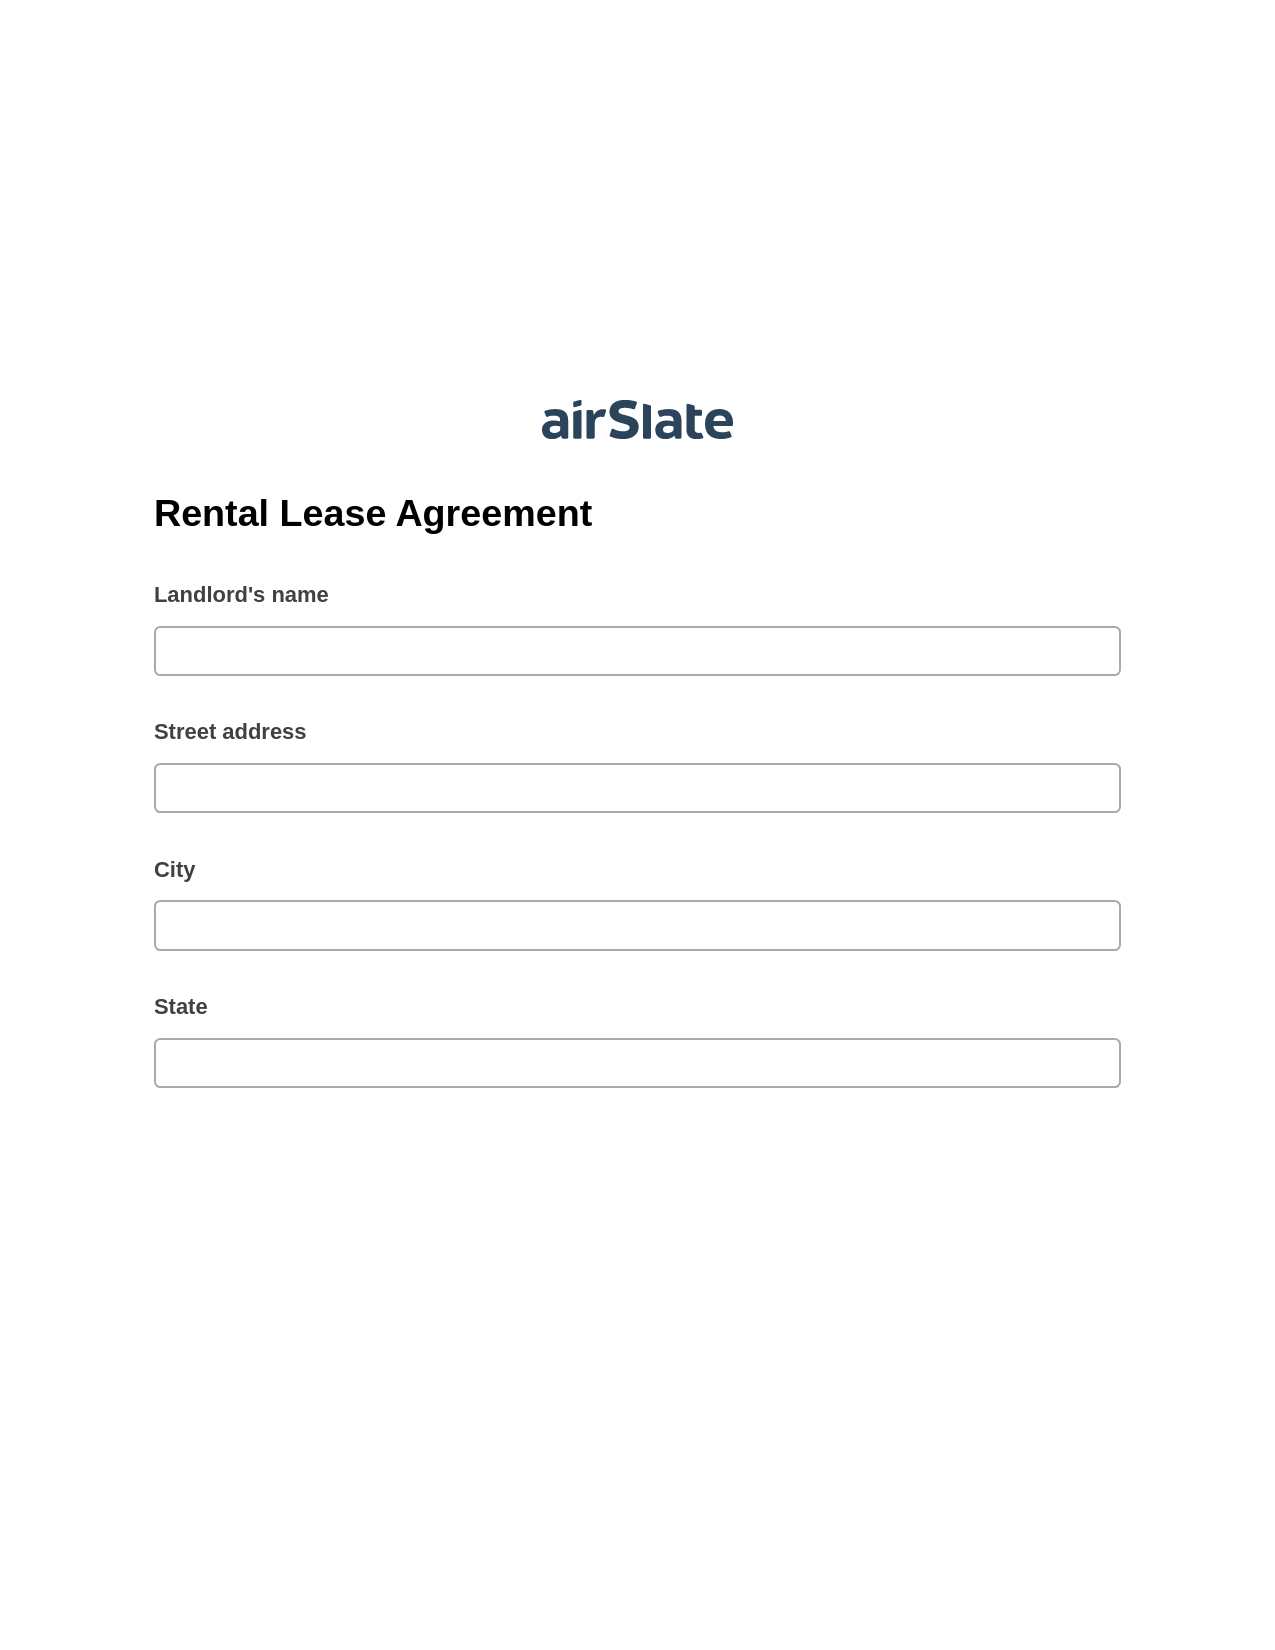 Multirole Rental Lease Agreement Pre-fill from Excel Spreadsheet Dropdown Options Bot, Update NetSuite Records Bot, Export to Google Sheet Bot